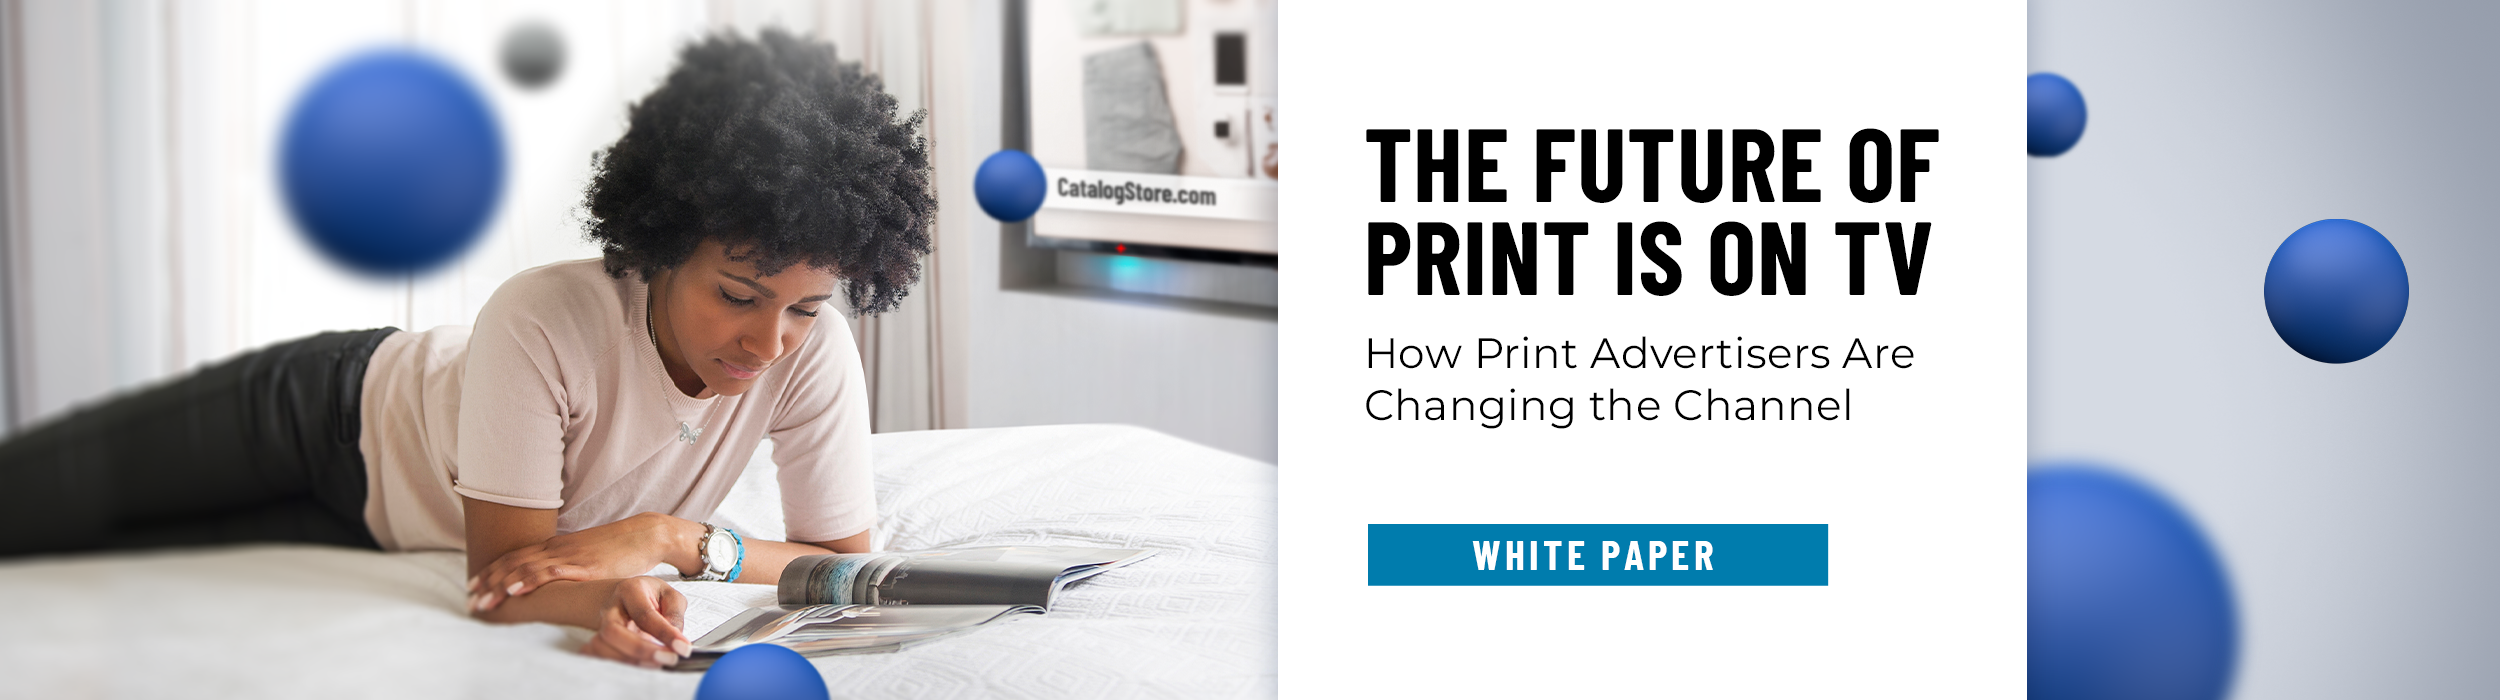 The Future of Print is on TV